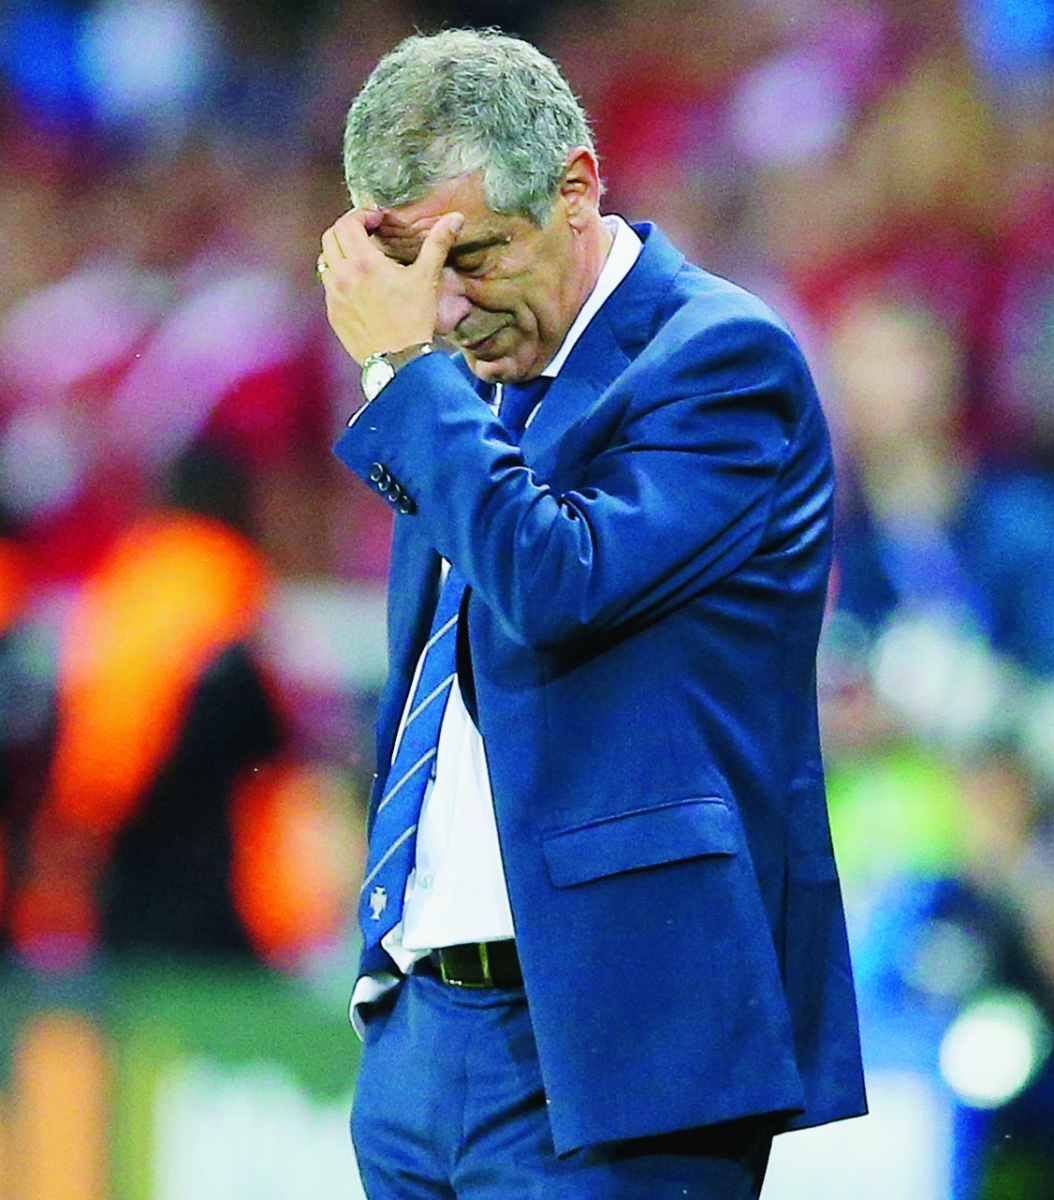 epa05376513 Portugal coach Fernando Santos reacts  during the UEFA EURO 2016 group F preliminary round match between Portugal and Austria at Parc des Princes Stadium in Paris, France, 18 June 2016. The match ended 0-0.



(RESTRICTIONS APPLY: For editorial news reporting purposes only. Not used for commercial or marketing purposes without prior written approval of UEFA. Images must appear as still images and must not emulate match action video footage. Photographs published in online publications (whether via the Internet or otherwise) shall have an interval of at least 20 seconds between the posting.)  EPA/MIGUEL A. LOPES   EDITORIAL USE ONLY FRANCE SOCCER UEFA EURO 2016